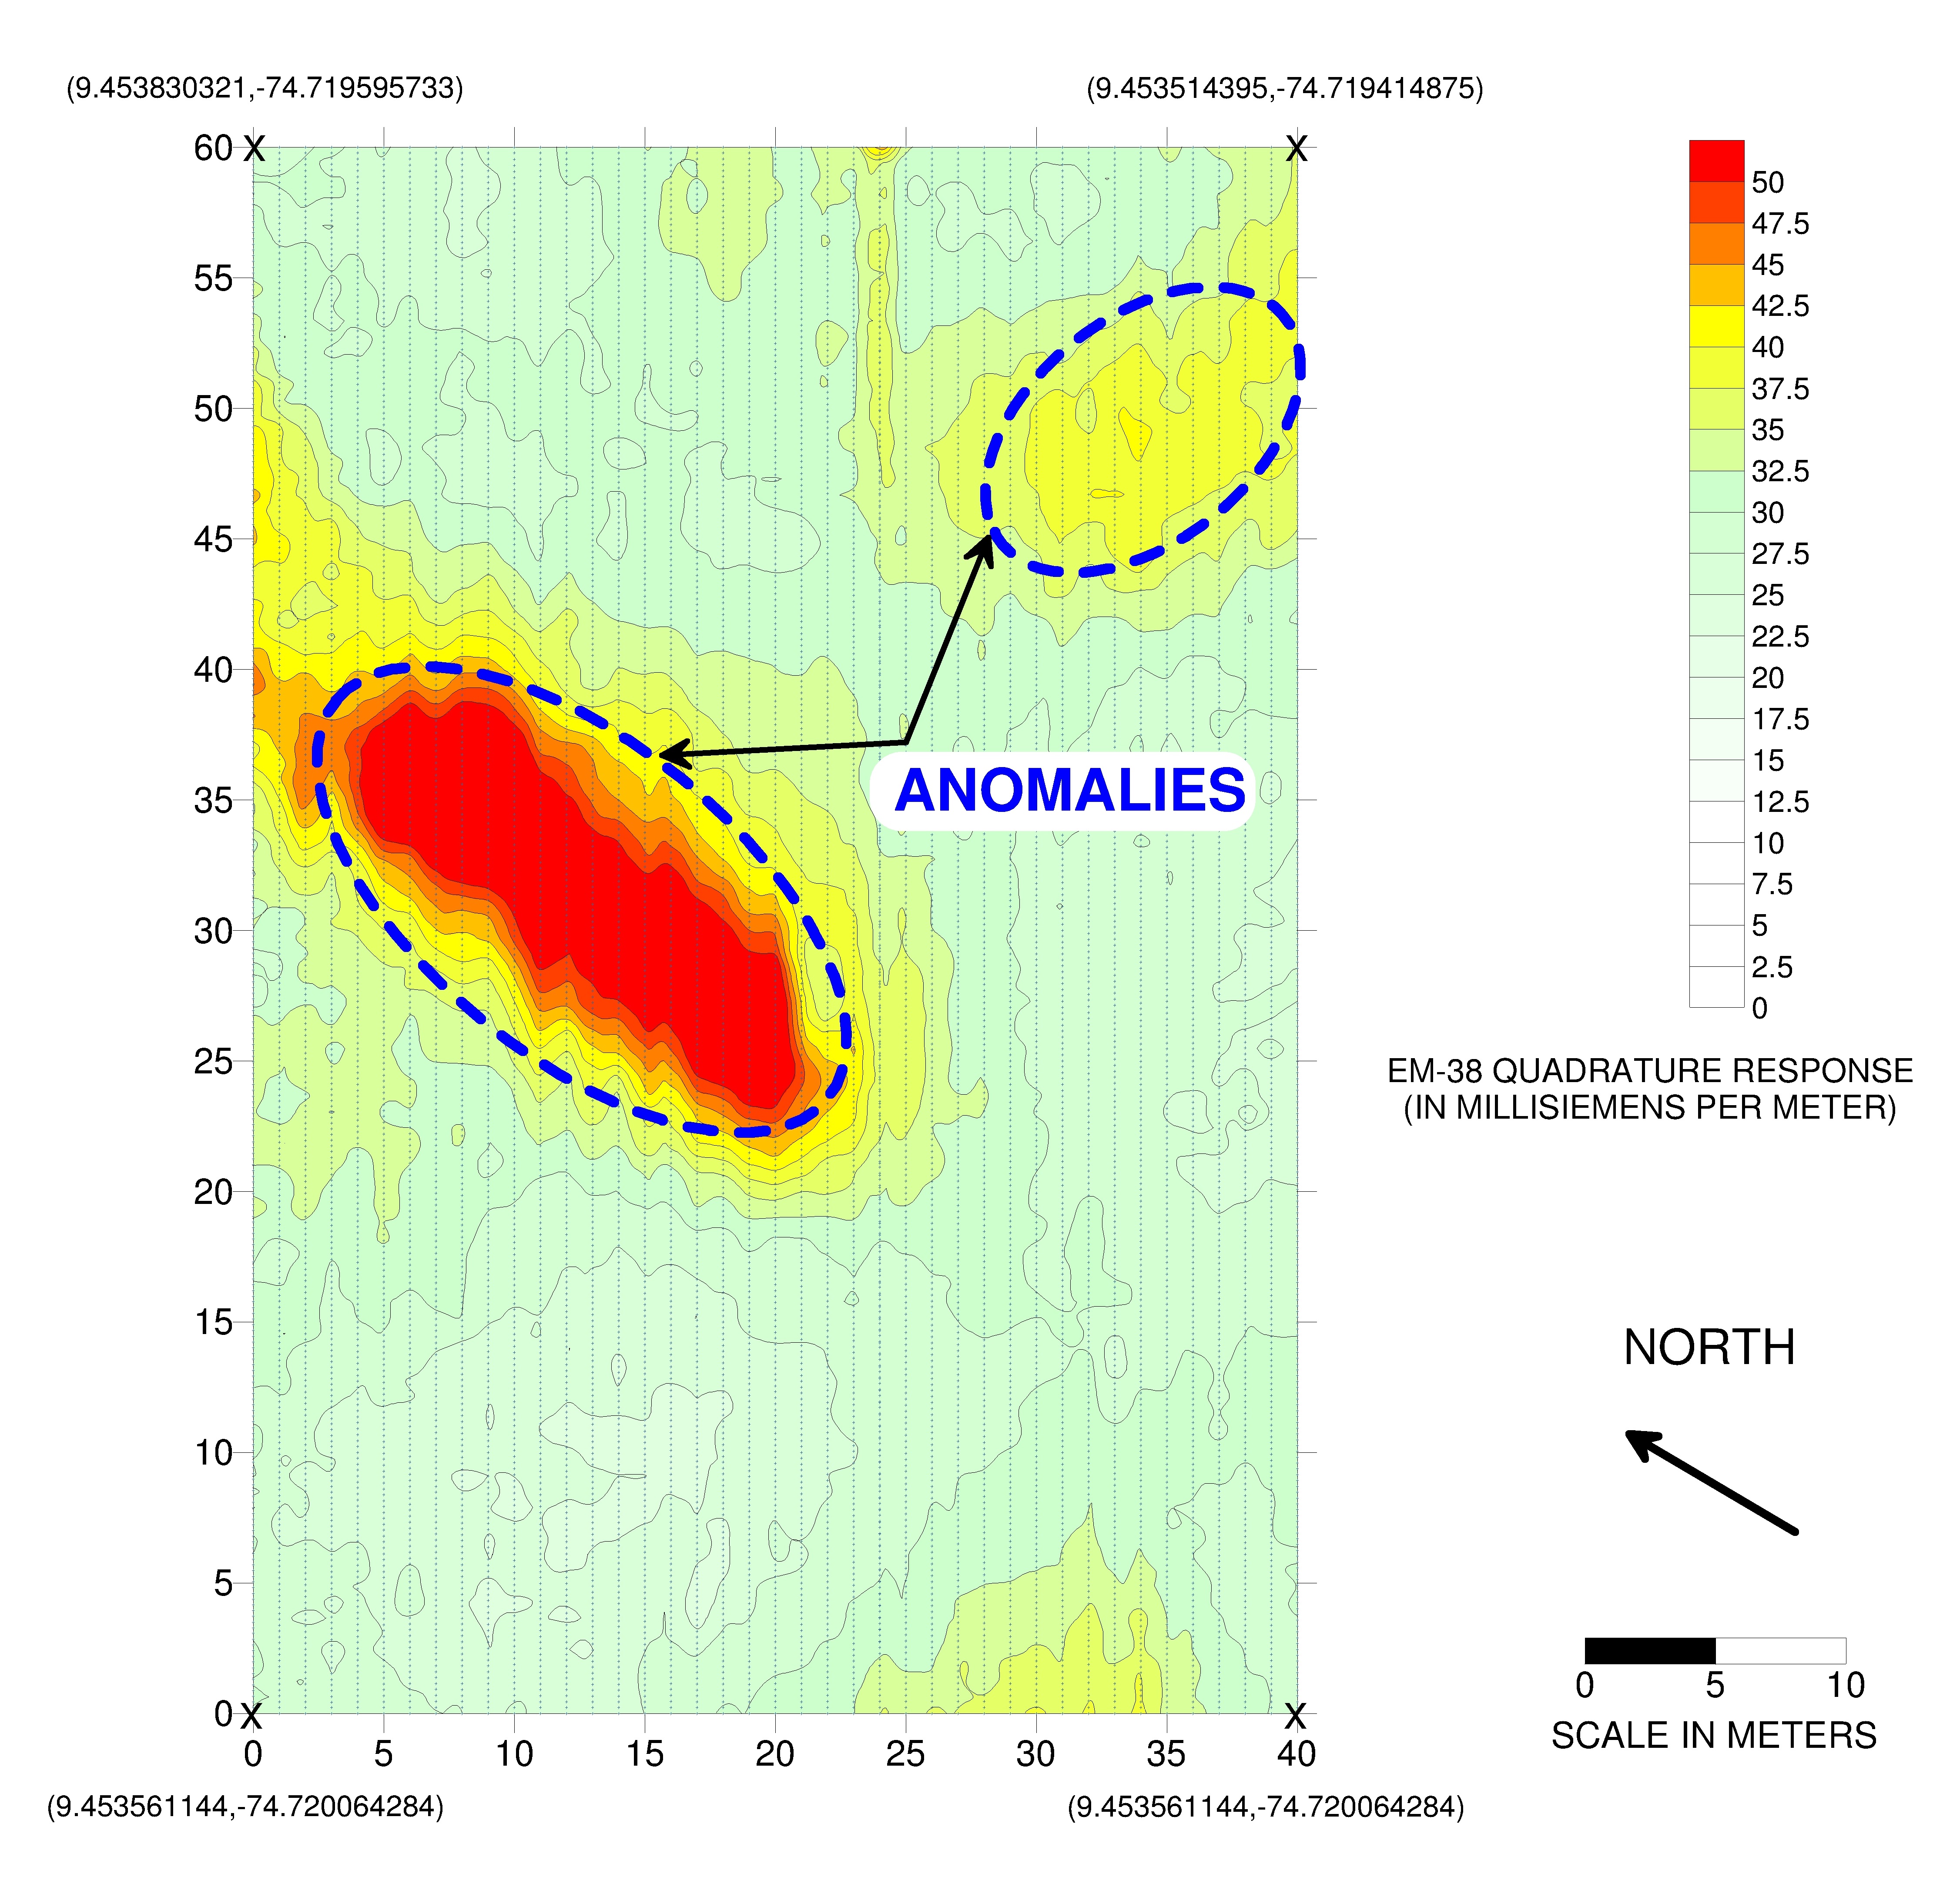 EM-38 Data Collected in Colombia